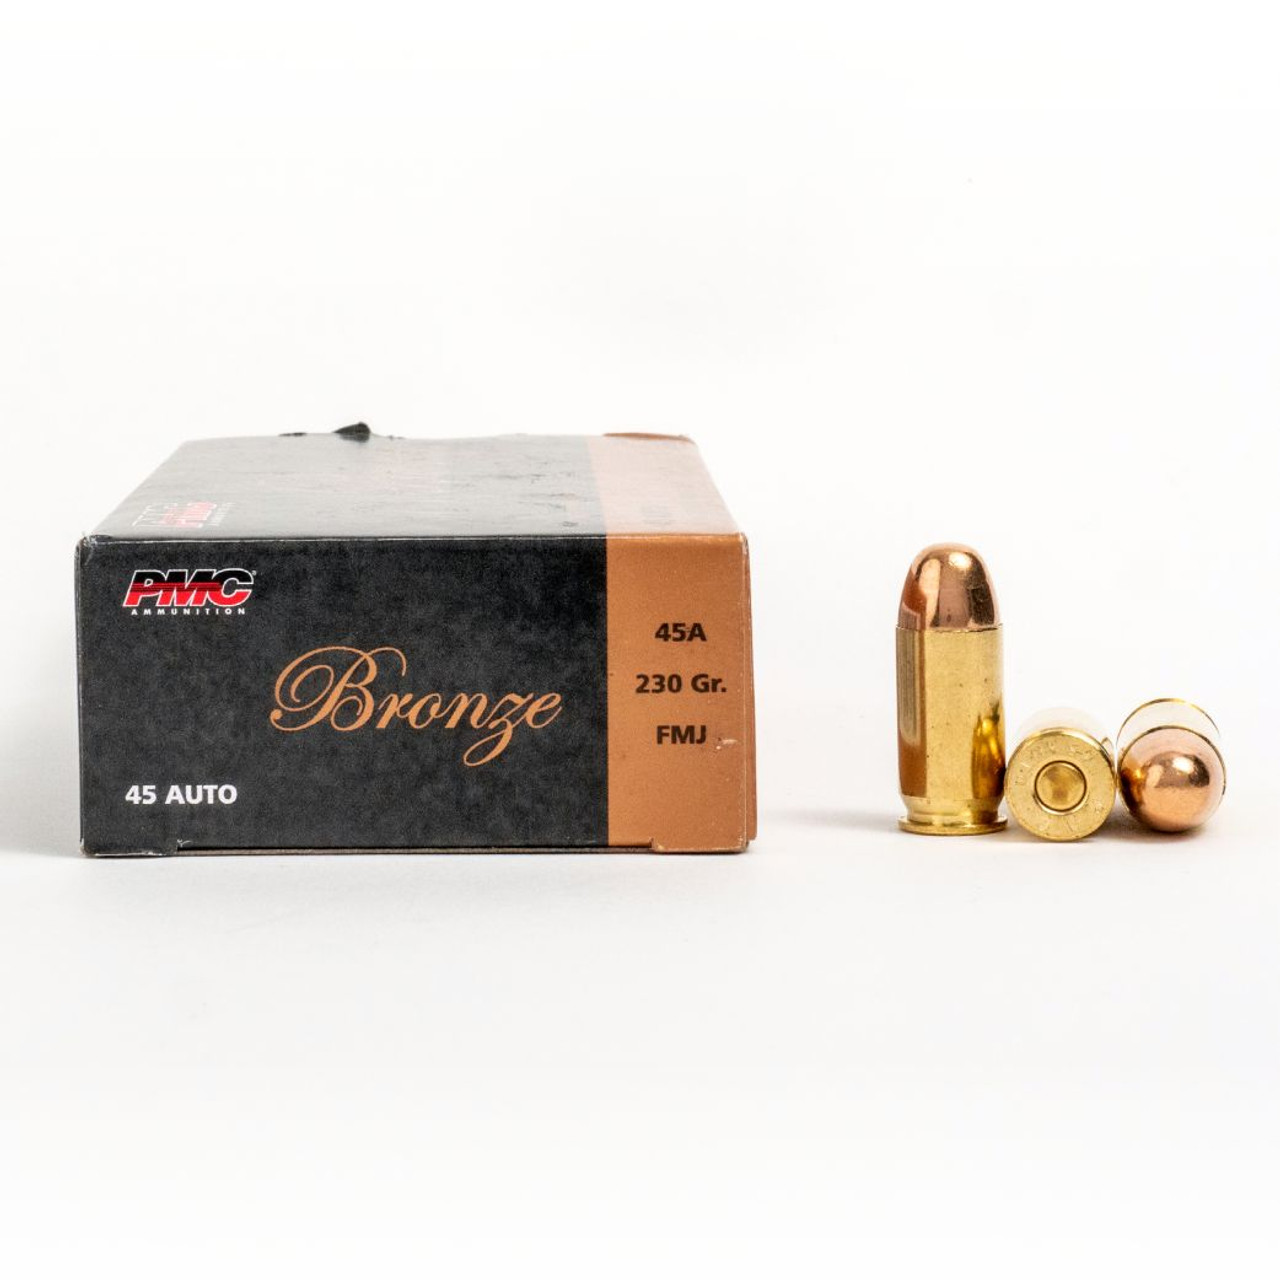 The PMC Bronze .45 ACP 230-grain FMJ 1,000 round case is an excellent choice for the shooter interested in saving some money by buying ammo in bulk and spending more time putting rounds downrange.

PMC, which stands for Poongsan Munitions Corporation, is a South Korean manufacturer but do not let that scare you away from giving them a try. They have been in business since the 1970s, utilize American steel & copper and employ many Americans.

They also produce all the ammunition used by the South Korean military. This means that they can offer inexpensive, brass case ammunition perfect for the shooter looking for a cheaper option when practicing with their favorite .45 ACP.

Each .45 ACP 230 grain FMJ PMC Bronze round is produced utilizing a lead core full metal jacket bullet, first run reloadable brass case and a non-corrosive boxer primer. The PMC Bronze line produces less recoil than many of the competitors, making it ideal for longer range sessions and those who shoot a lot.

Plus, with a muzzle velocity of 830 feet per second and consistent accuracy, you will not be sacrificing performance for the sake of saving some money.

Reloaders can stretch their savings even further by recycling the brass multiple times.